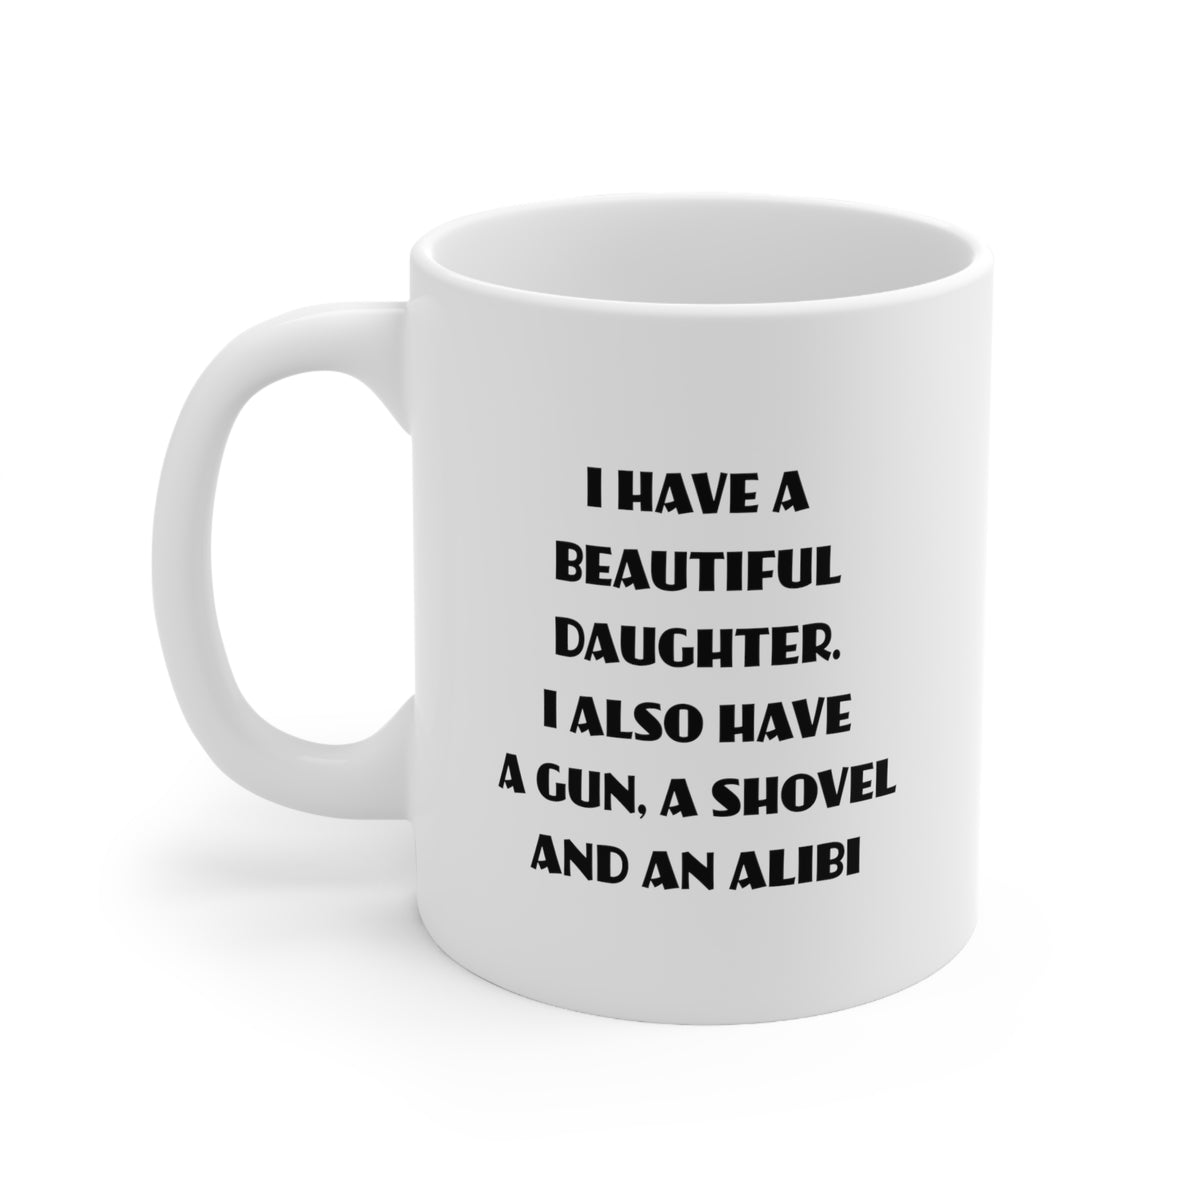 Daughter Gifts - I Have A Beautiful Daughter. I Also Have A Gun, A Shovel And An Alibi - Daughter White Coffee Mug, Tea Cup